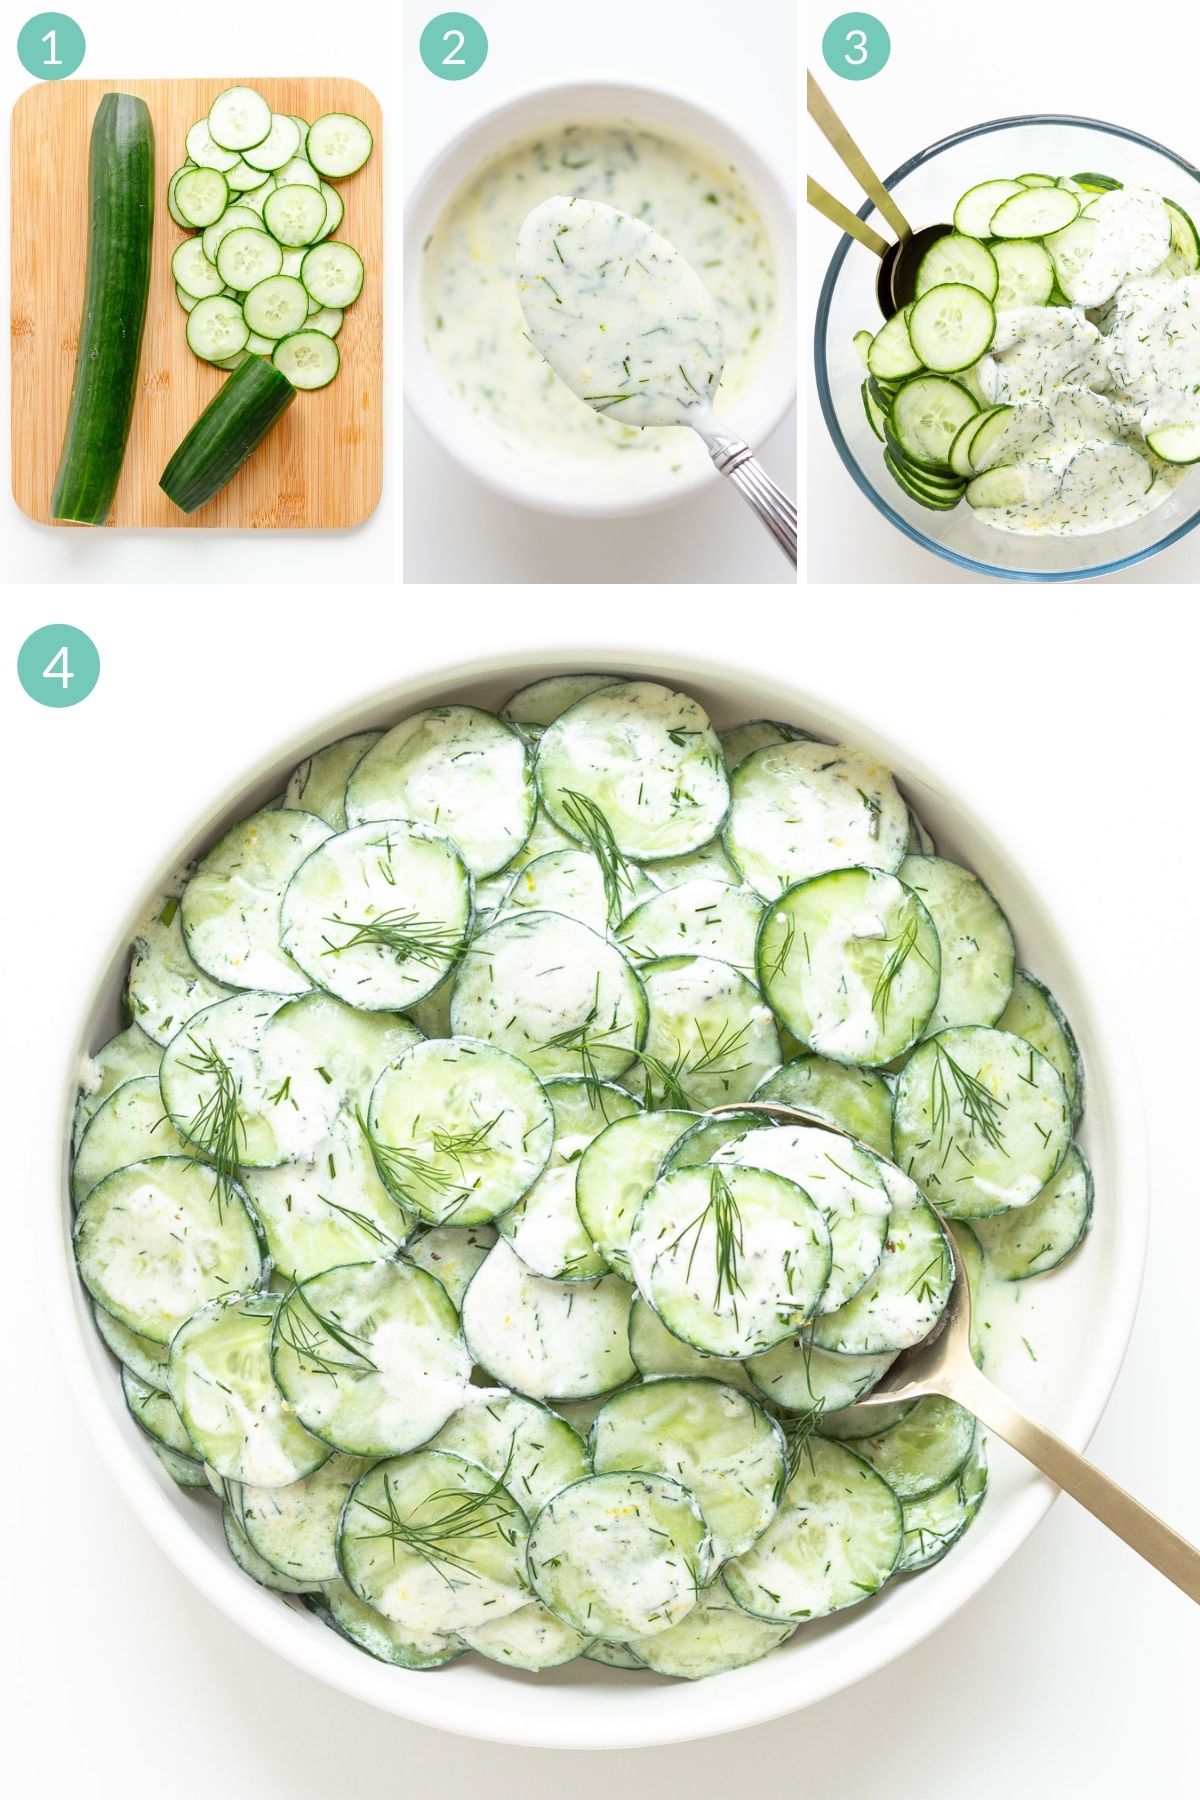 Numbered collage showing how to make cucumber yogurt salad step by step.